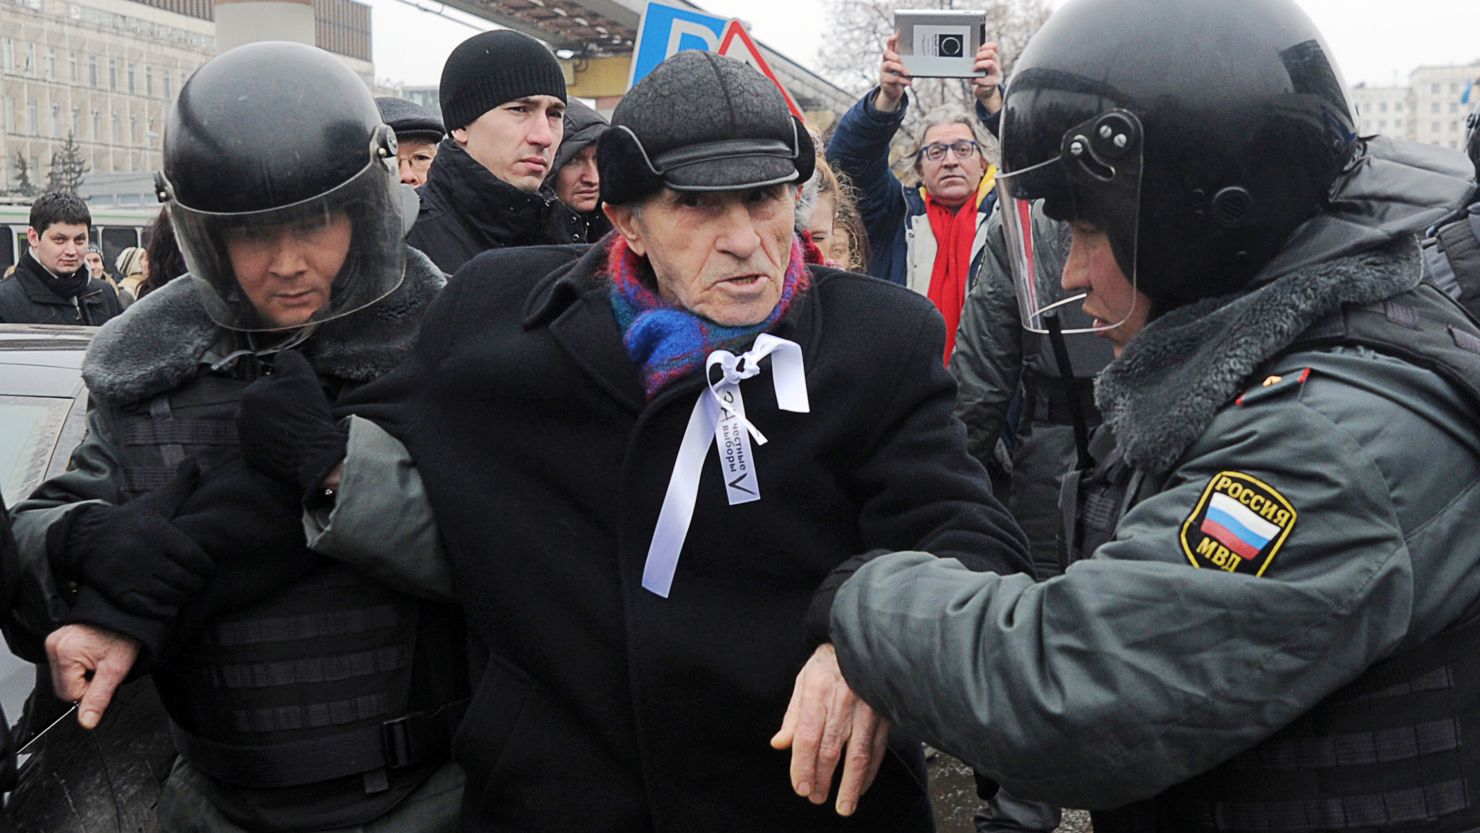 Russian riot policemen detain a protestor during a demonstration outside Ostankino TV Center in Moscow on March 18, 2012.